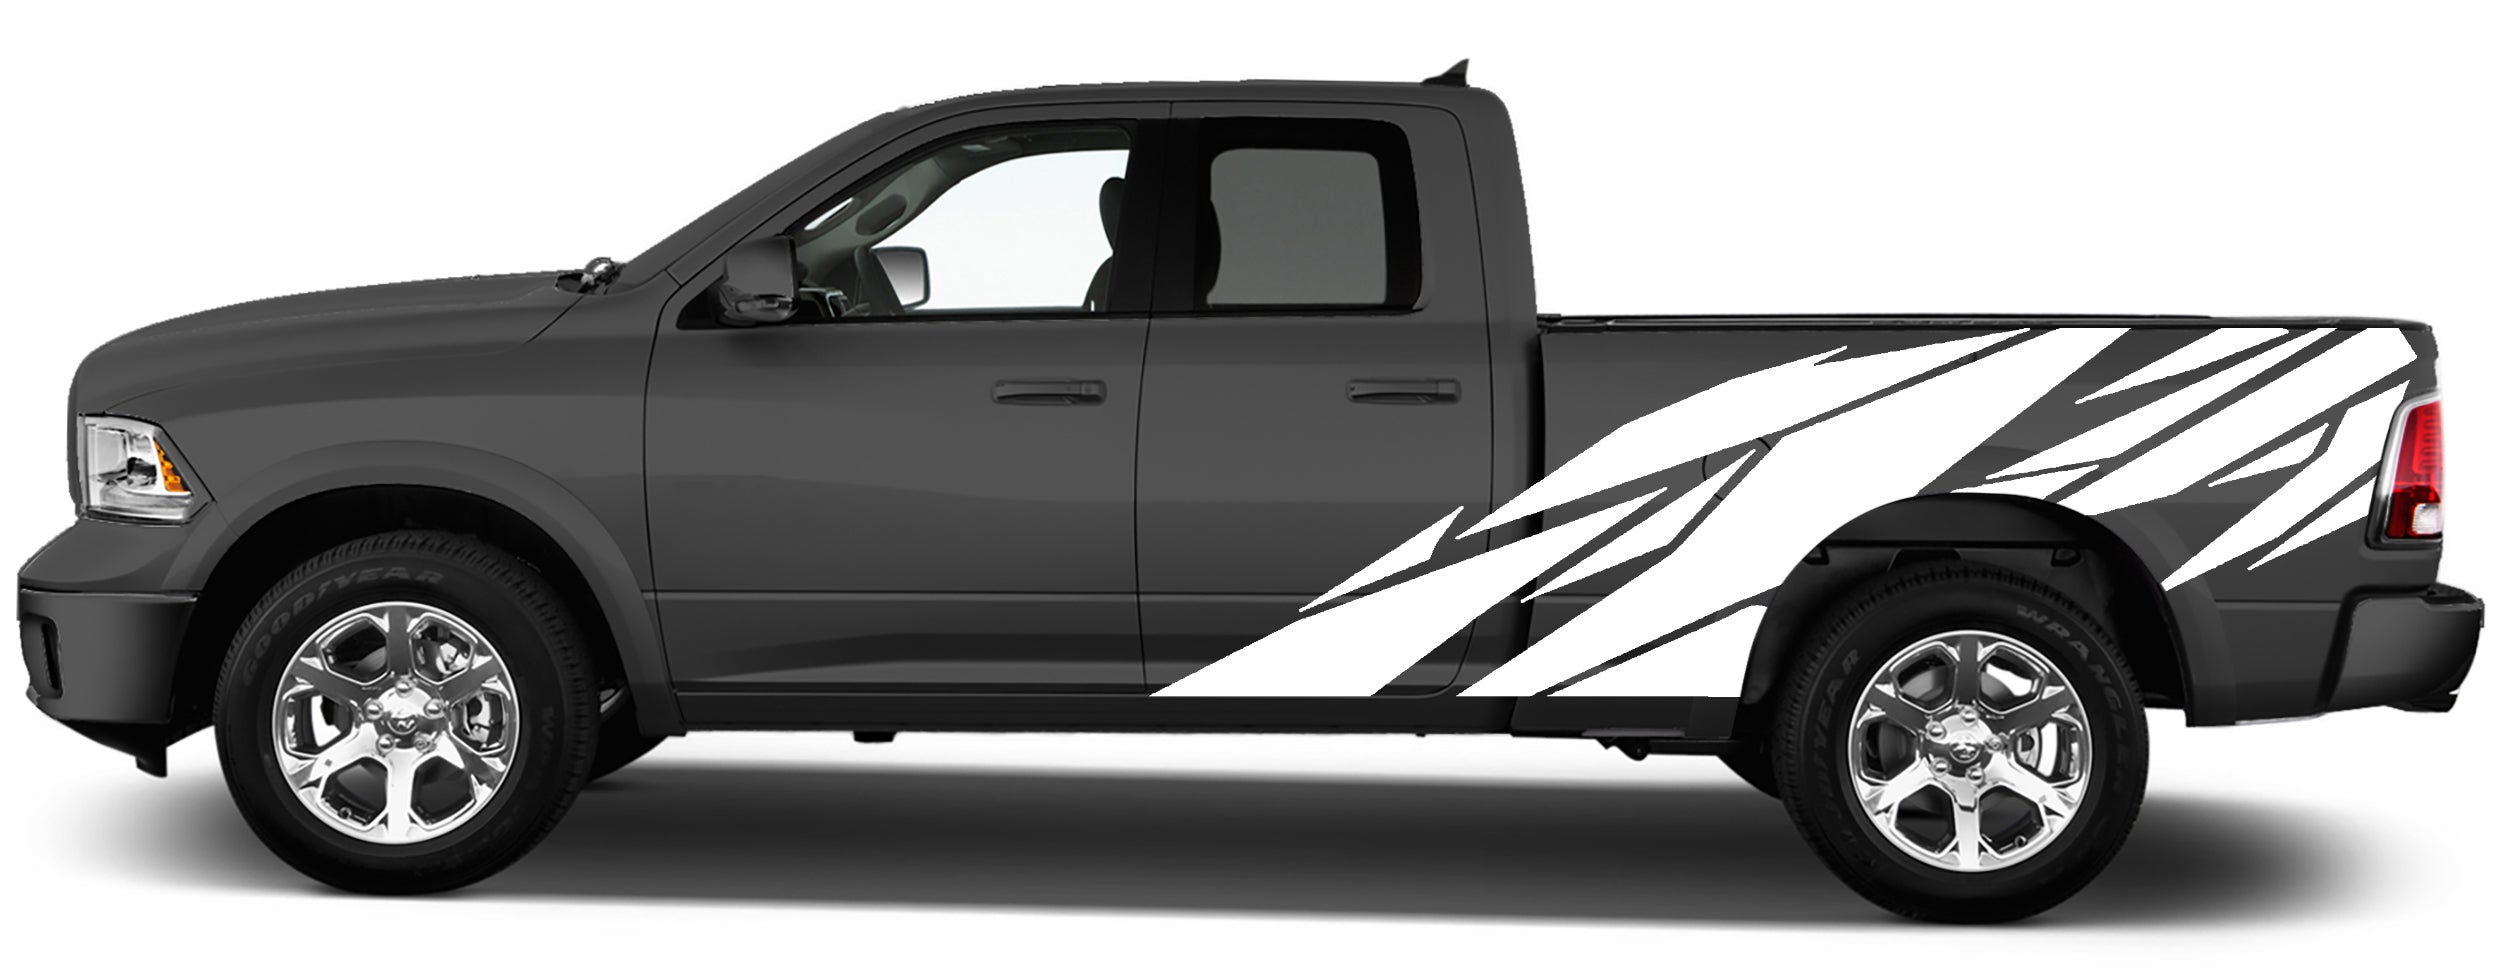 geometric side graphics for dodge ram 2008 to 2018 models white